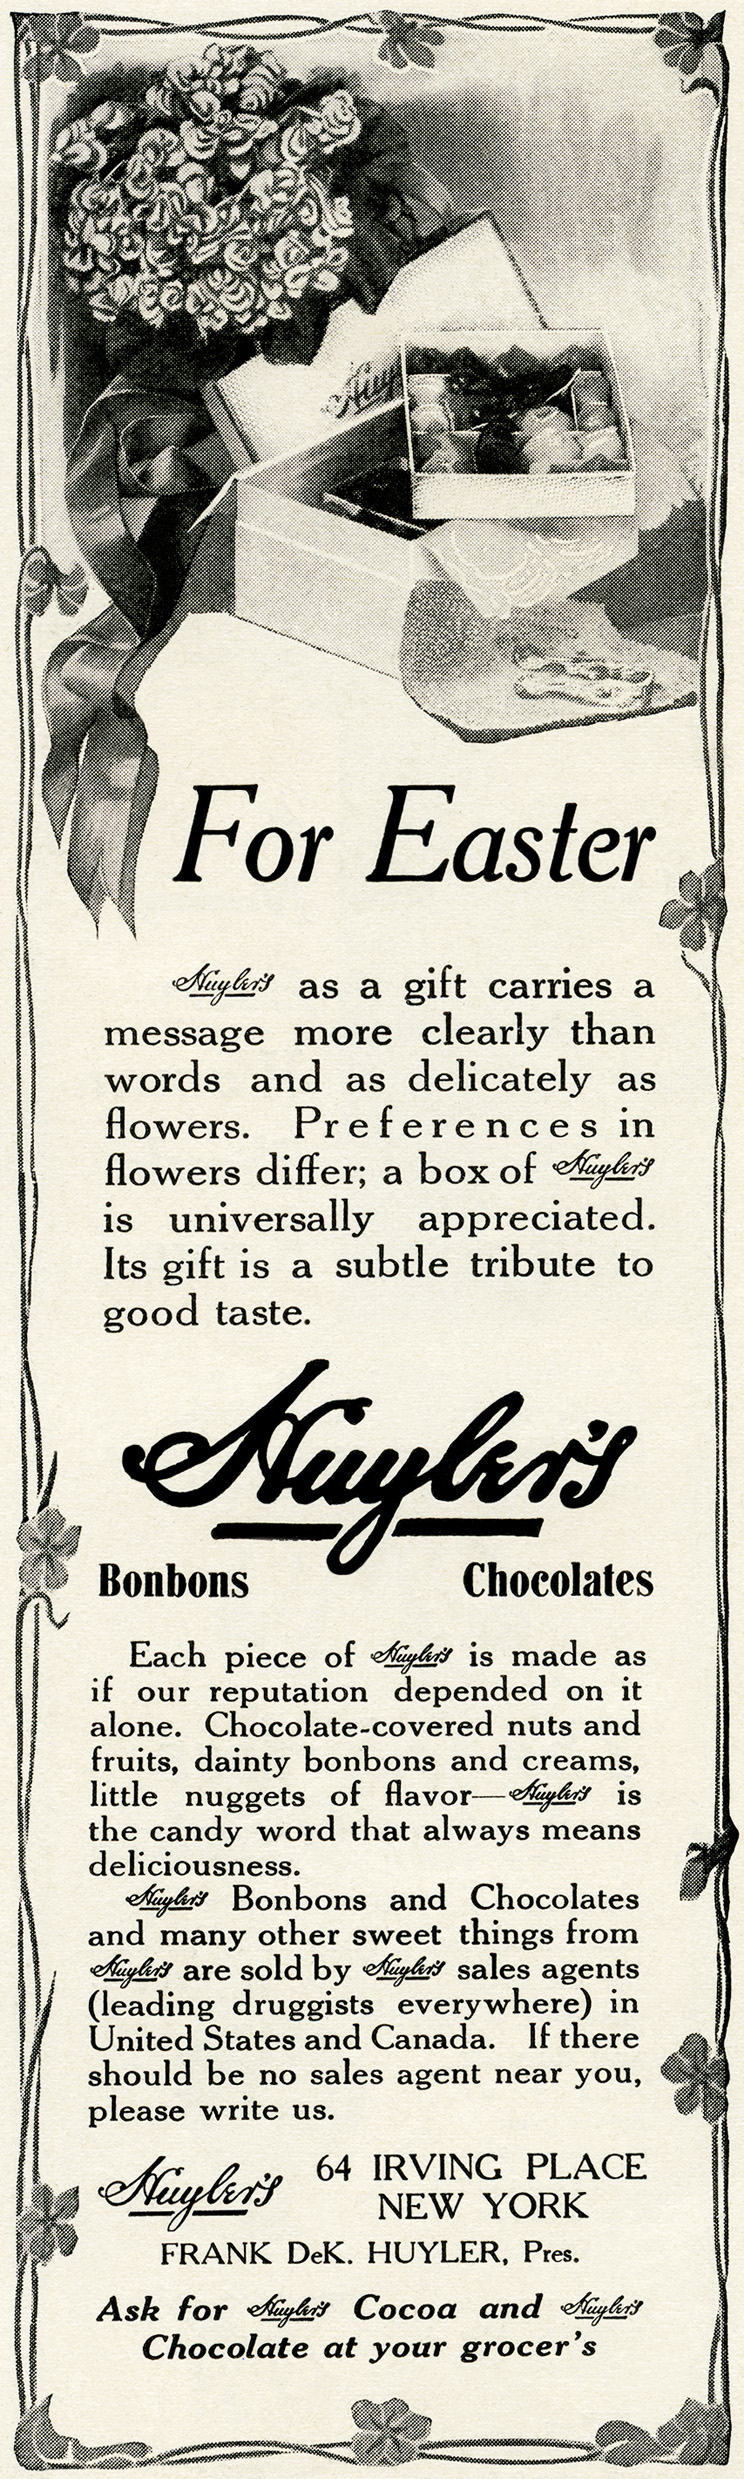 huylers chocolate, vintage advertisement, antique magazine ad, easter chocolate clipart